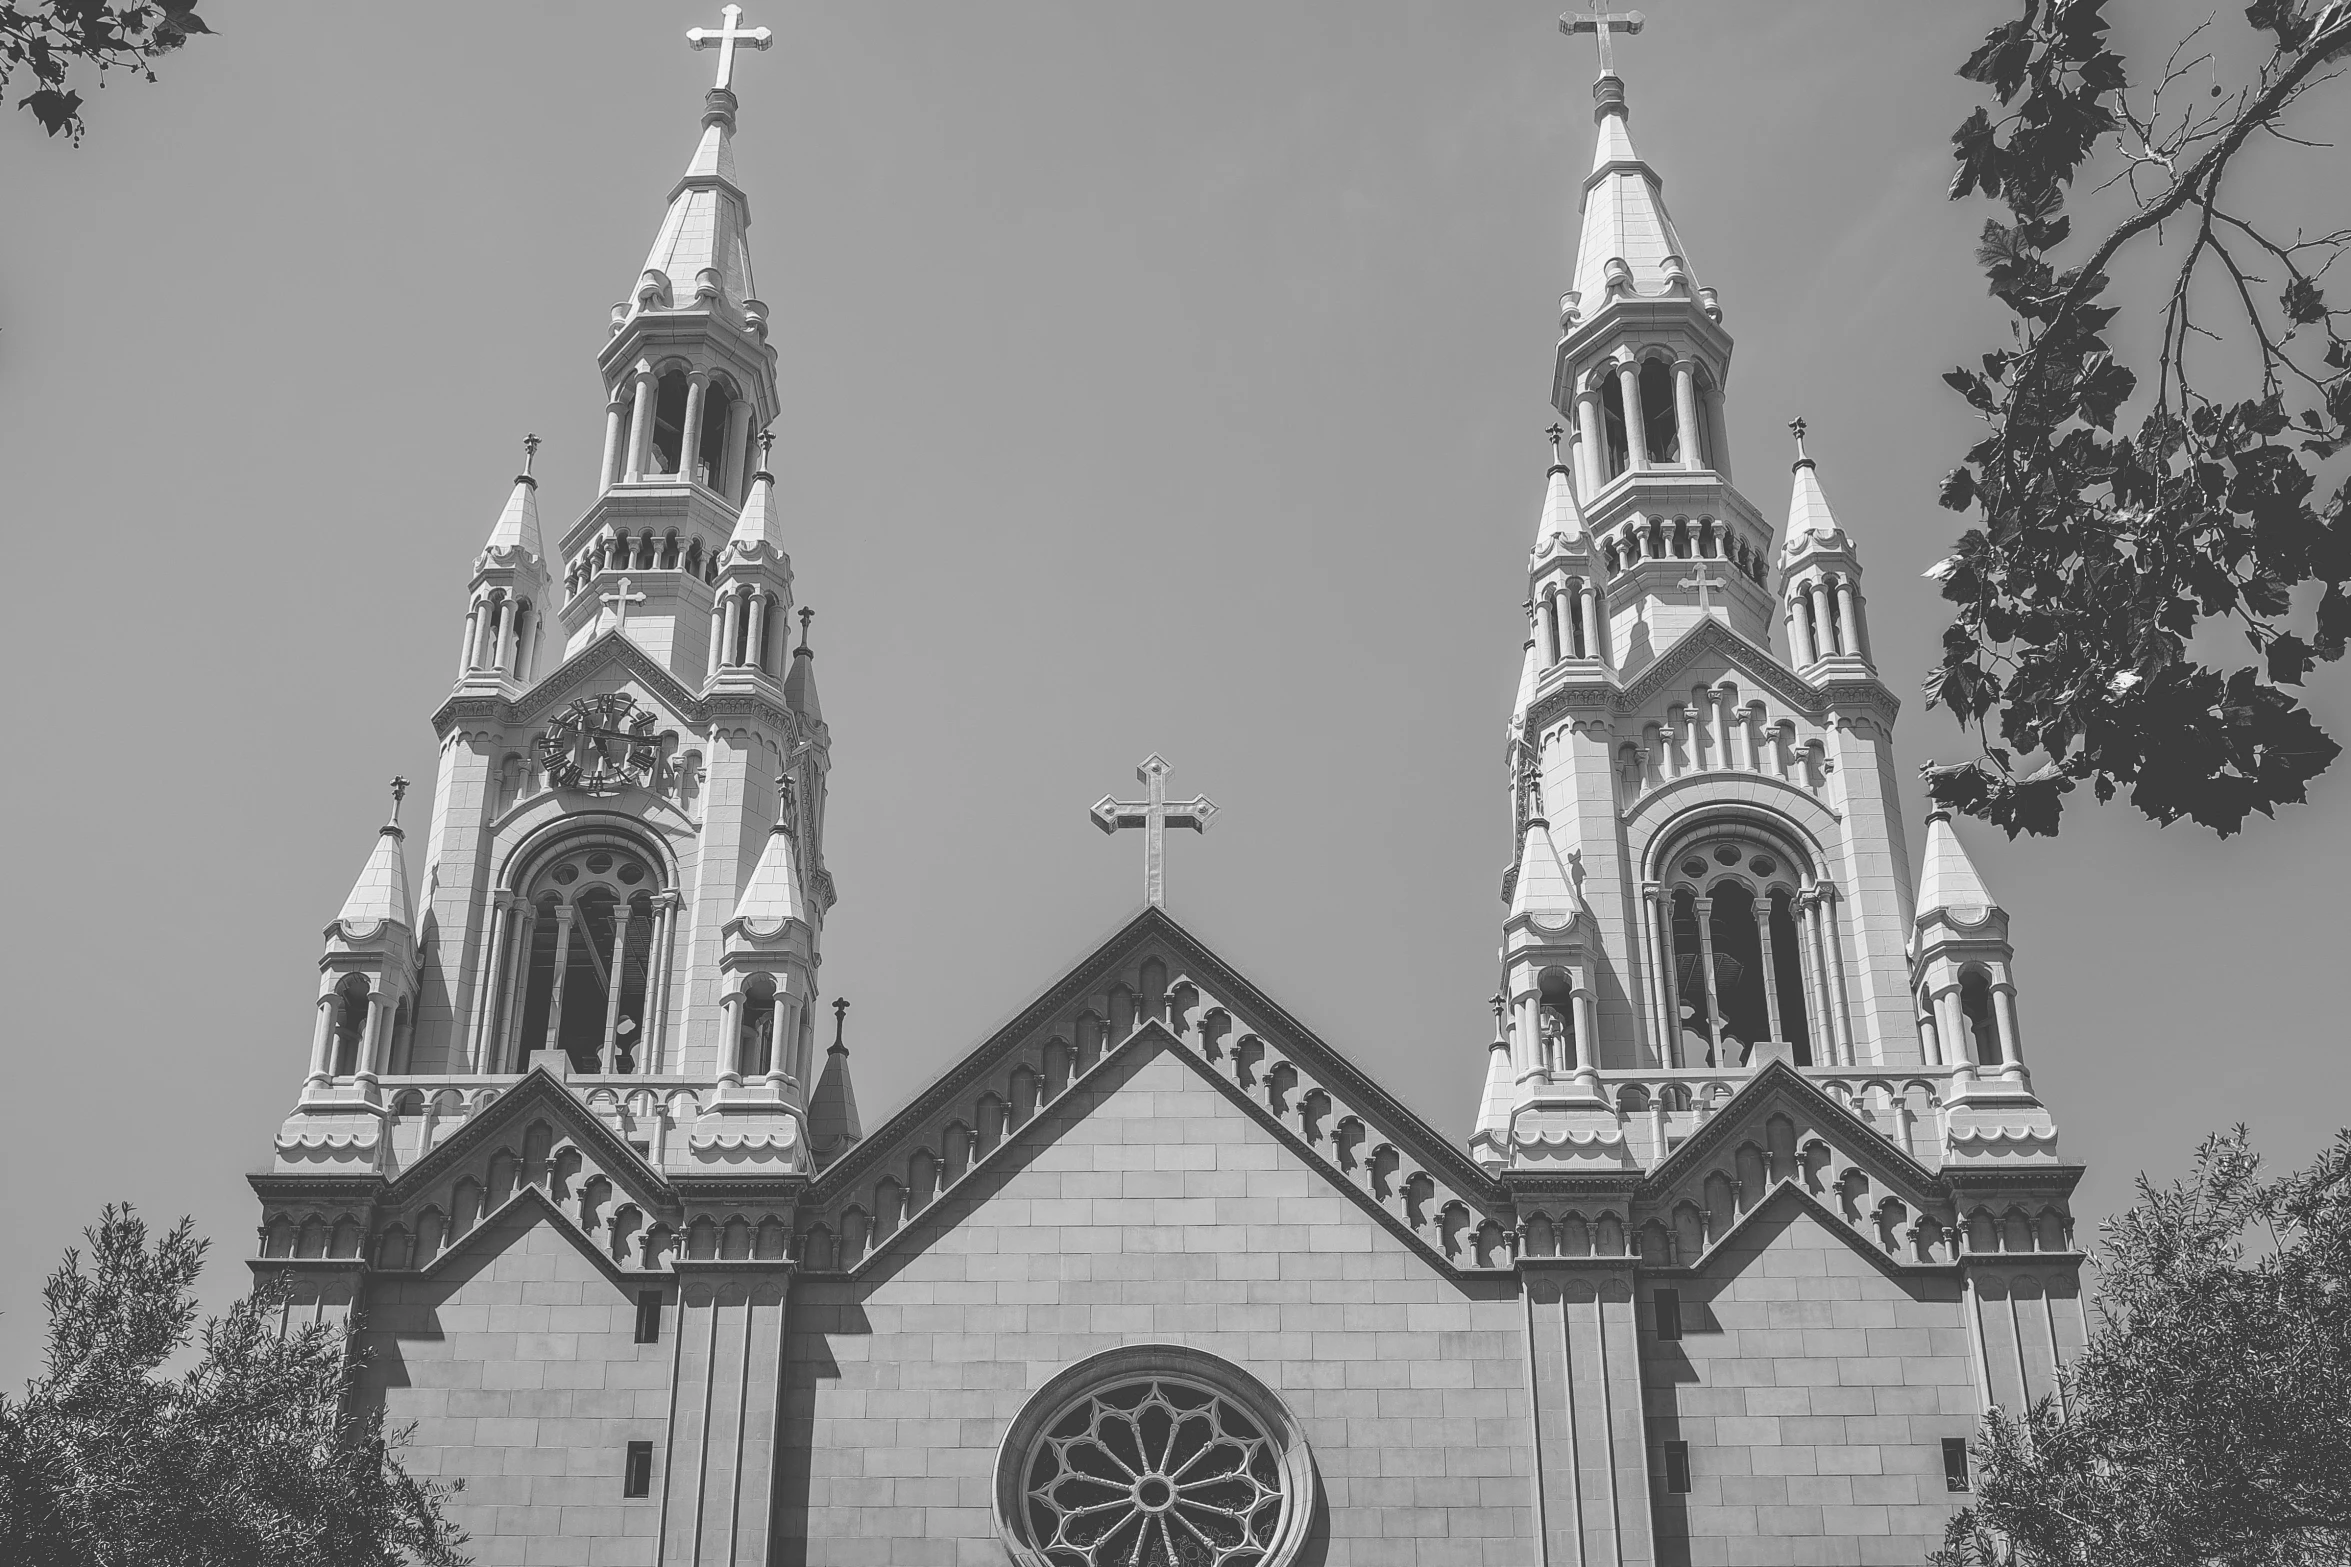 a black and white po of a building with steeples